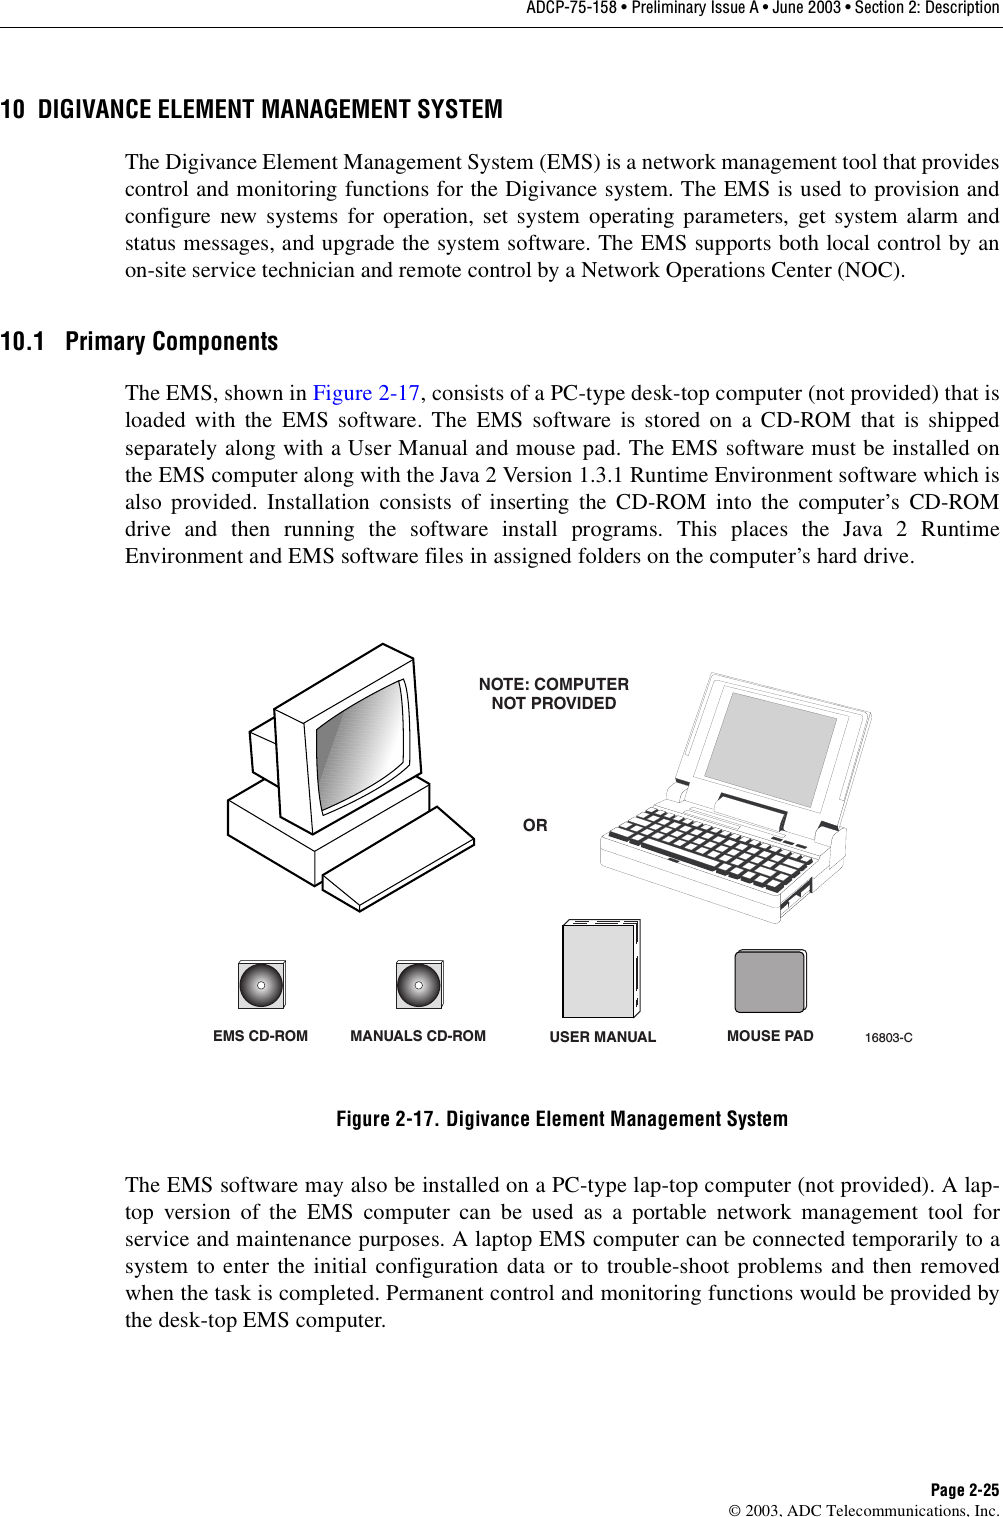 ADCP-75-158 • Preliminary Issue A • June 2003 • Section 2: DescriptionPage 2-25© 2003, ADC Telecommunications, Inc.10 DIGIVANCE ELEMENT MANAGEMENT SYSTEMThe Digivance Element Management System (EMS) is a network management tool that providescontrol and monitoring functions for the Digivance system. The EMS is used to provision andconfigure new systems for operation, set system operating parameters, get system alarm andstatus messages, and upgrade the system software. The EMS supports both local control by anon-site service technician and remote control by a Network Operations Center (NOC). 10.1 Primary ComponentsThe EMS, shown in Figure 2-17, consists of a PC-type desk-top computer (not provided) that isloaded with the EMS software. The EMS software is stored on a CD-ROM that is shippedseparately along with a User Manual and mouse pad. The EMS software must be installed onthe EMS computer along with the Java 2 Version 1.3.1 Runtime Environment software which isalso provided. Installation consists of inserting the CD-ROM into the computer’s CD-ROMdrive and then running the software install programs. This places the Java 2 RuntimeEnvironment and EMS software files in assigned folders on the computer’s hard drive. Figure 2-17. Digivance Element Management SystemThe EMS software may also be installed on a PC-type lap-top computer (not provided). A lap-top version of the EMS computer can be used as a portable network management tool forservice and maintenance purposes. A laptop EMS computer can be connected temporarily to asystem to enter the initial configuration data or to trouble-shoot problems and then removedwhen the task is completed. Permanent control and monitoring functions would be provided bythe desk-top EMS computer. EMS CD-ROM MANUALS CD-ROMORNOTE: COMPUTERNOT PROVIDED16803-CUSER MANUAL MOUSE PAD